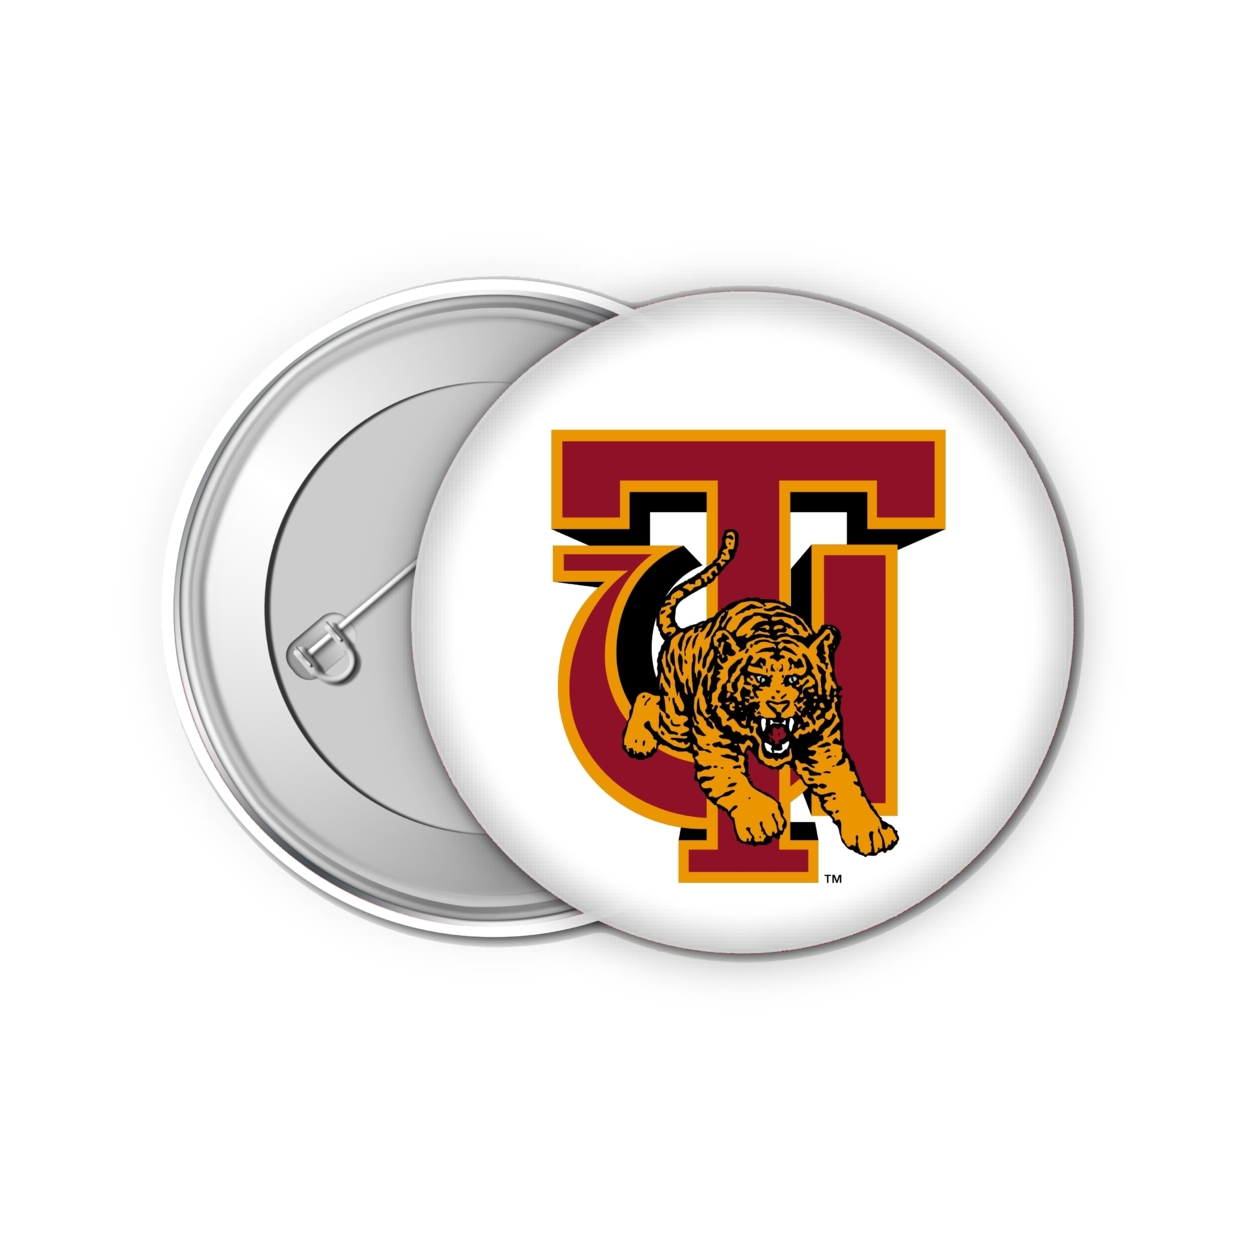 Tuskegee University Small 1-Inch Button Pin 4 Pack